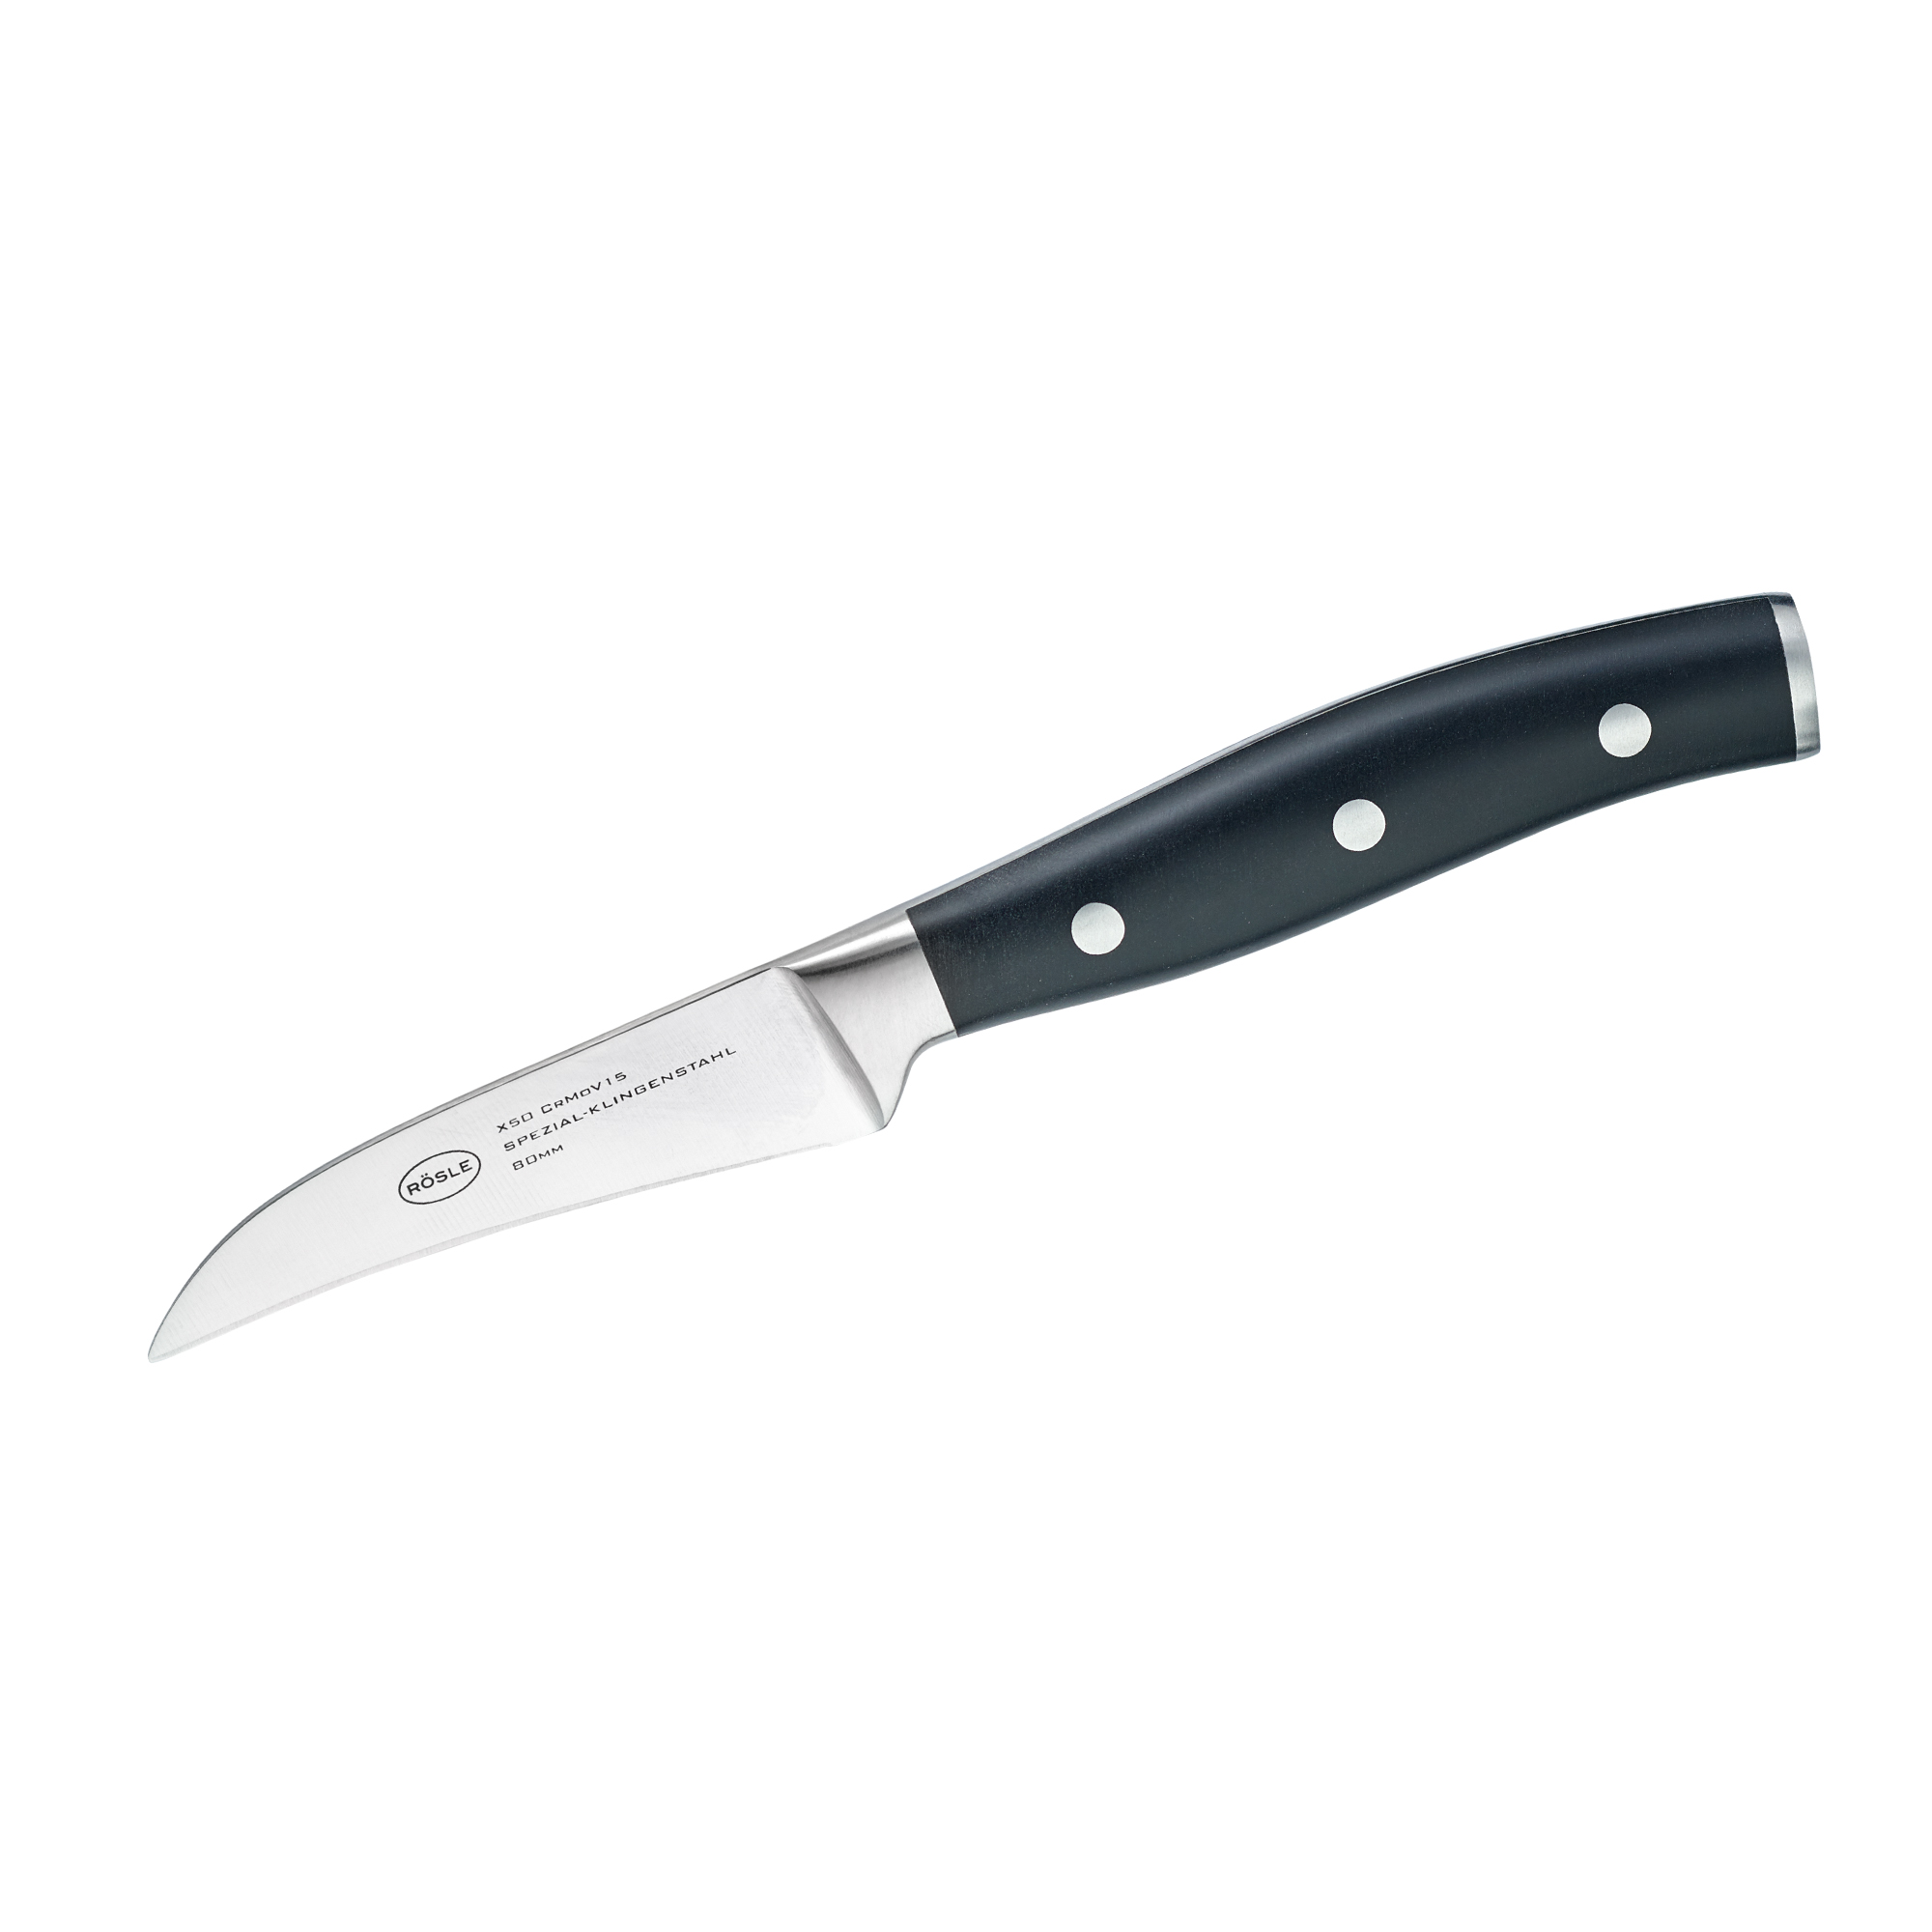 Paring knife Tradition 8 cm